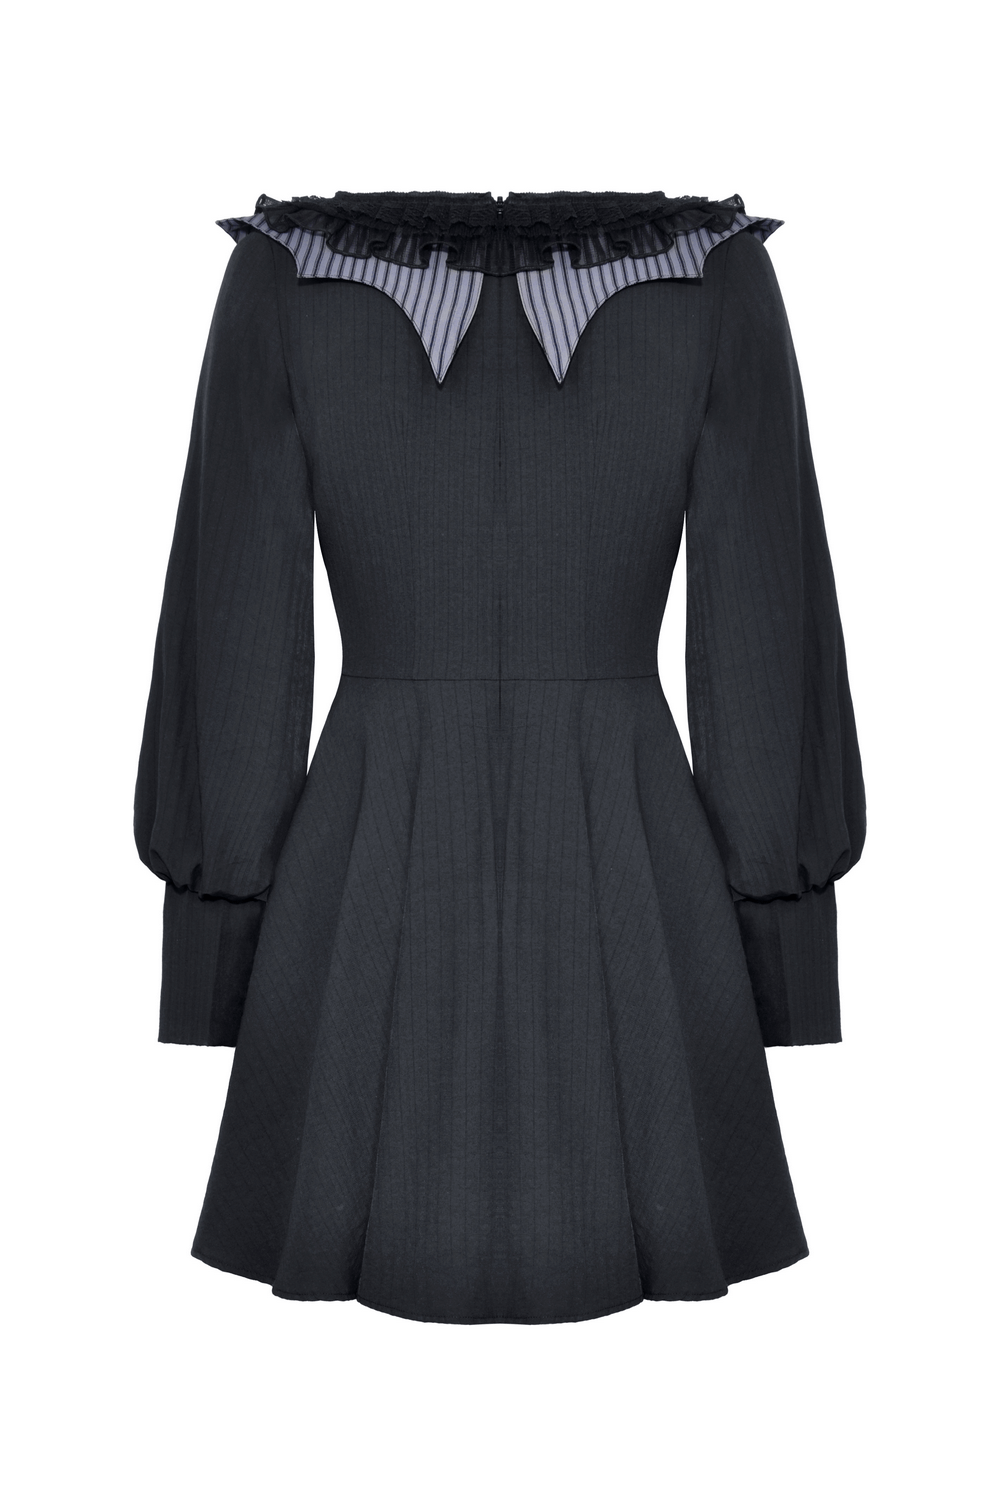 Black and Gray Striped Long Sleeve Dress with Ruffled Collar